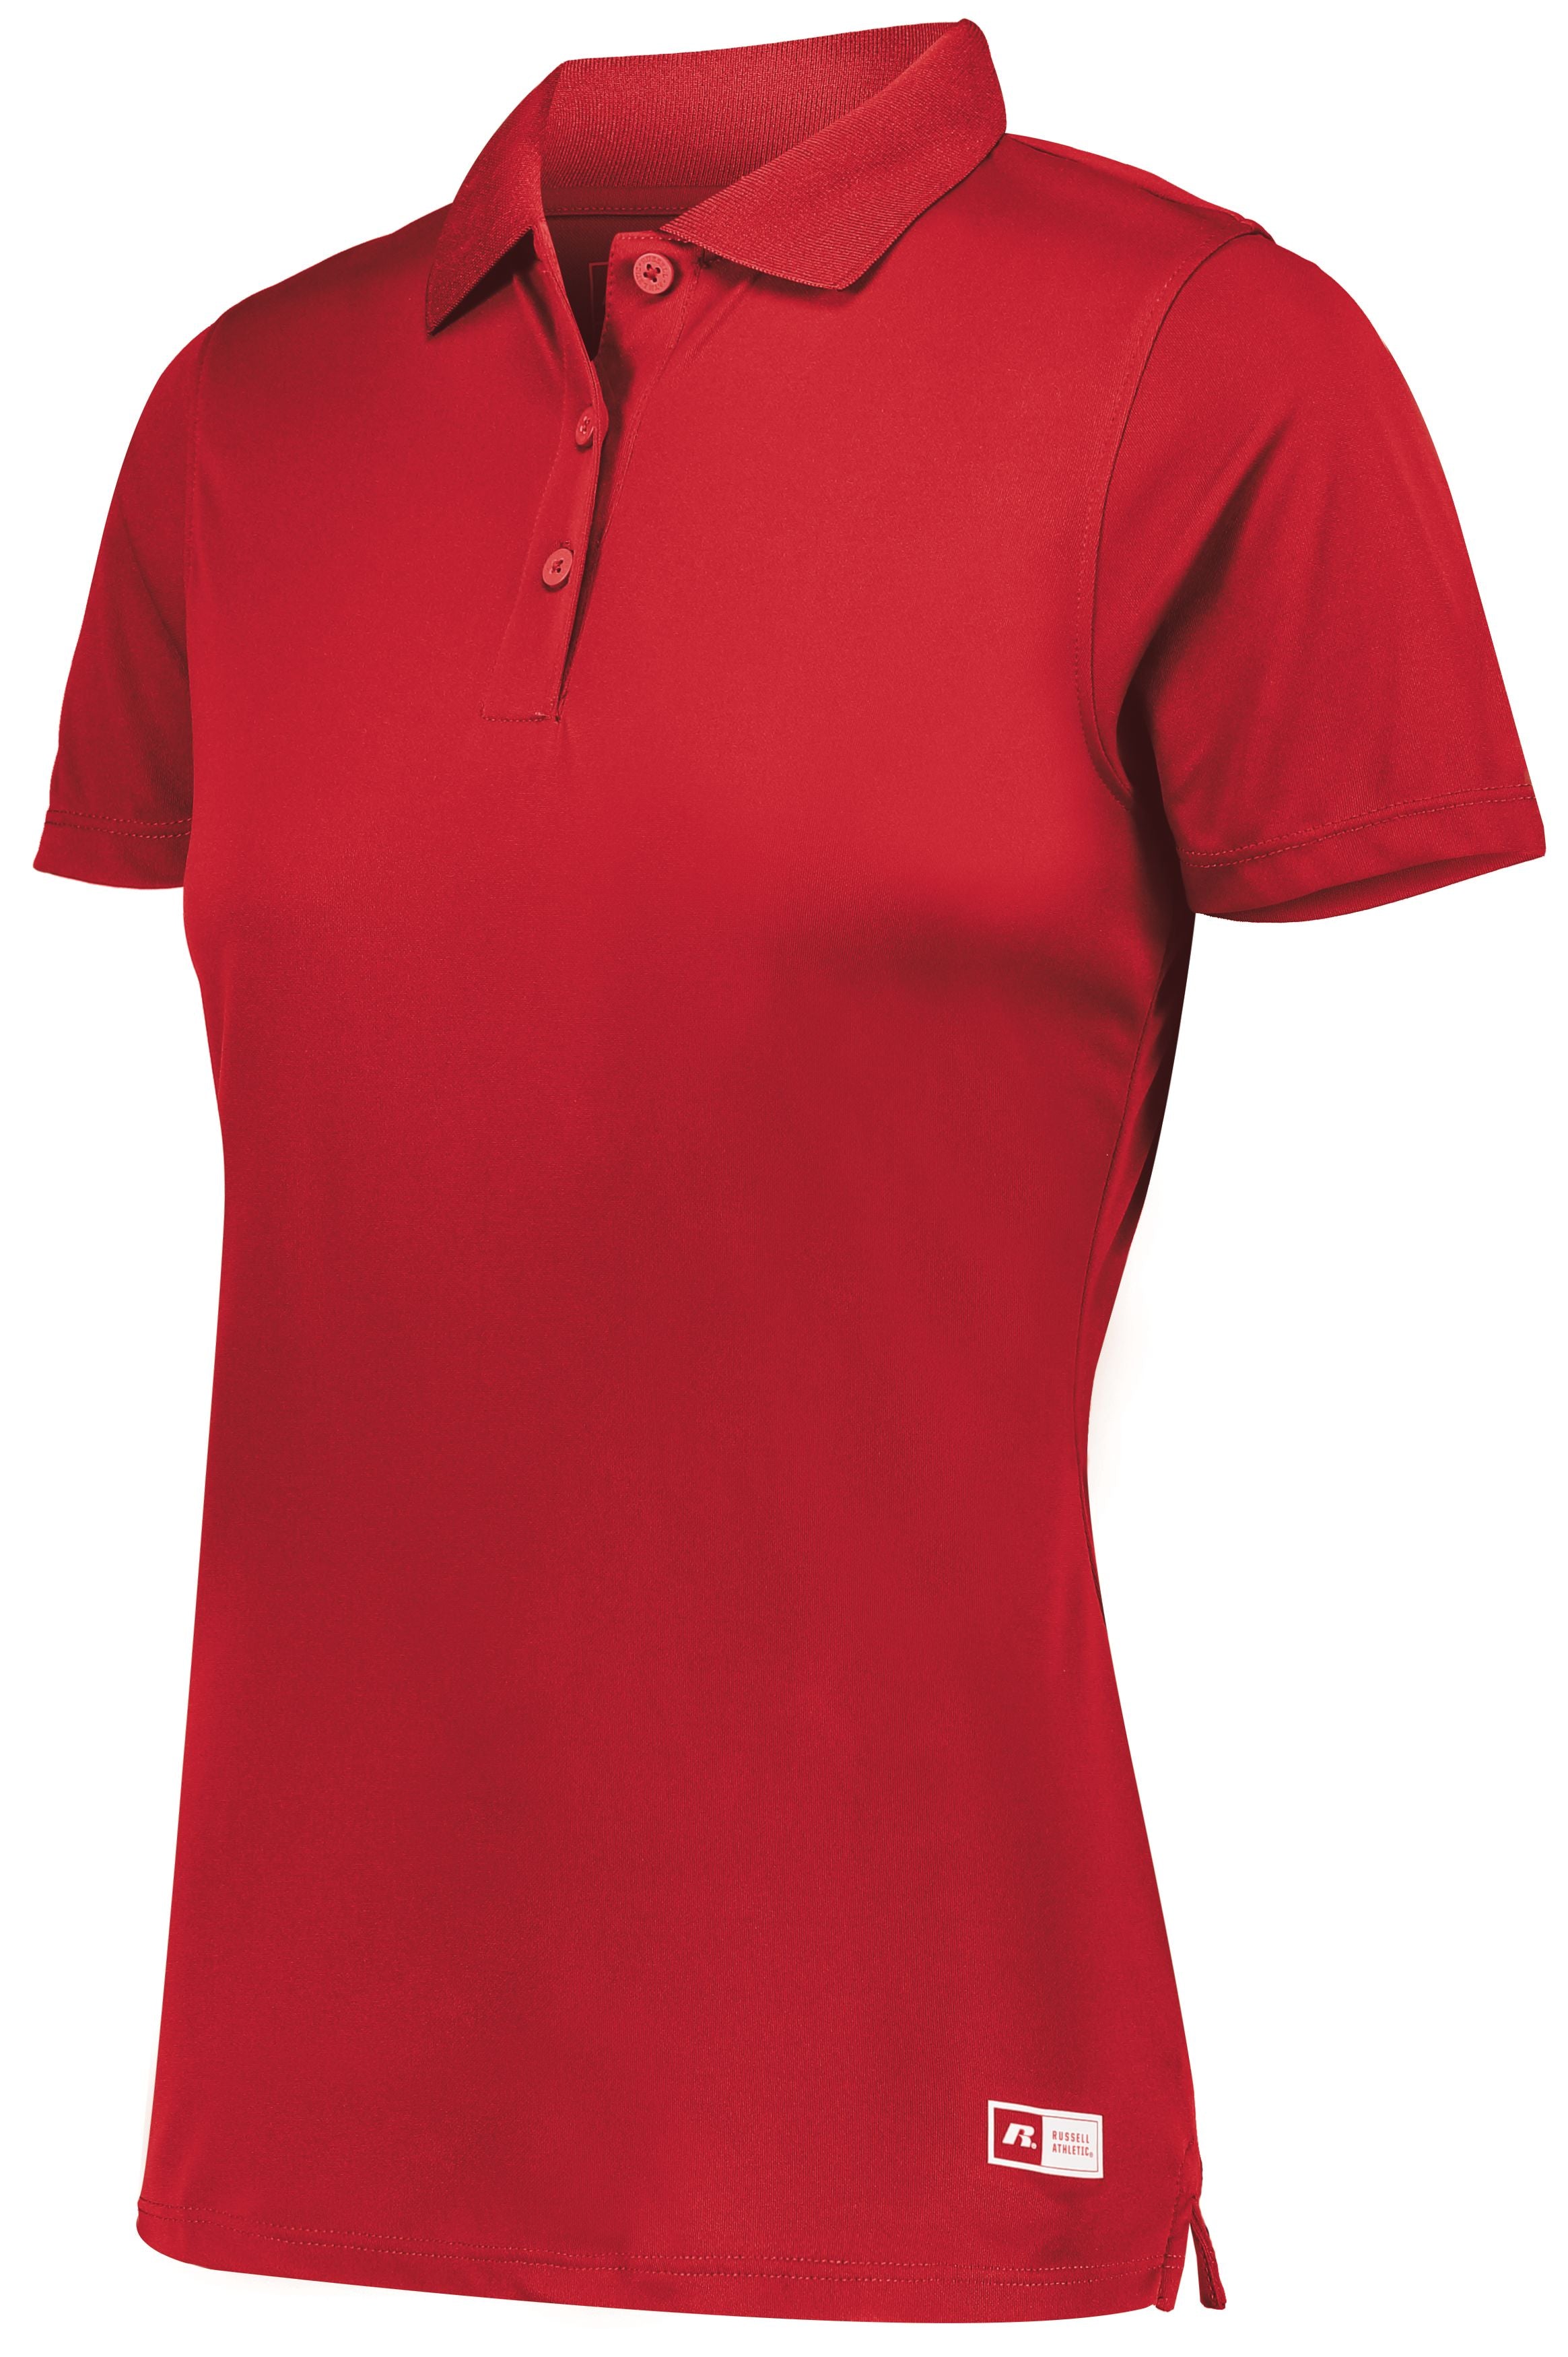 Russell Athletic Ladies Essential Polo in True Red  -Part of the Ladies, Ladies-Polo, Polos, Russell-Athletic-Products, Shirts, Corporate-Collection product lines at KanaleyCreations.com